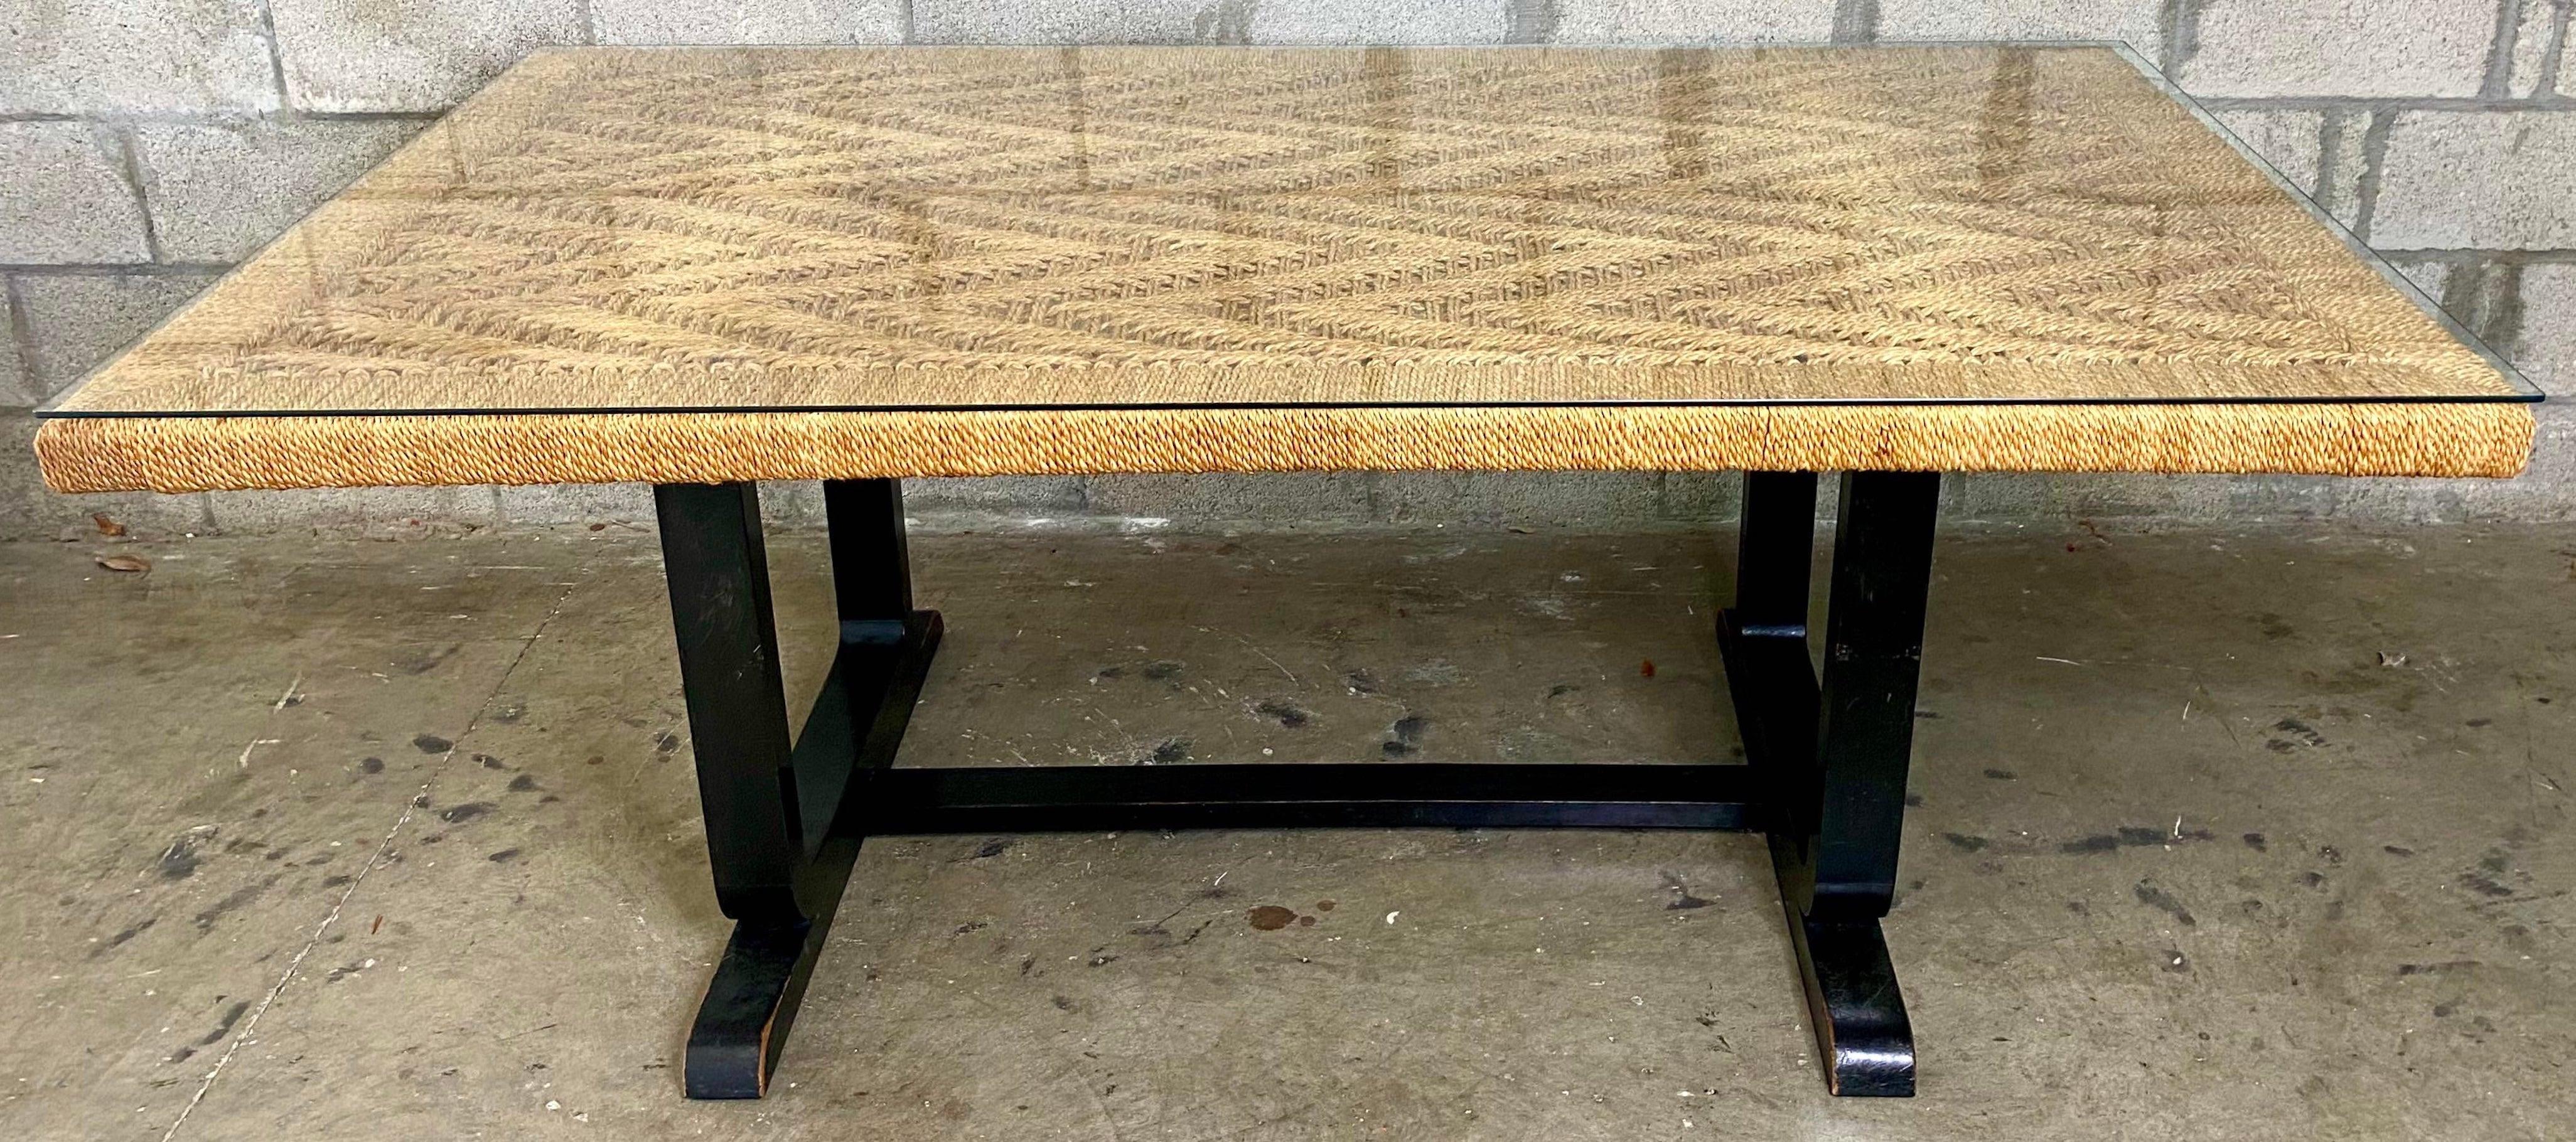 1970s Organic modern woven jute desk or dining room table
of rectangular form with flame-stitch woven jute top, resting on a ebonized wood trestle table base.